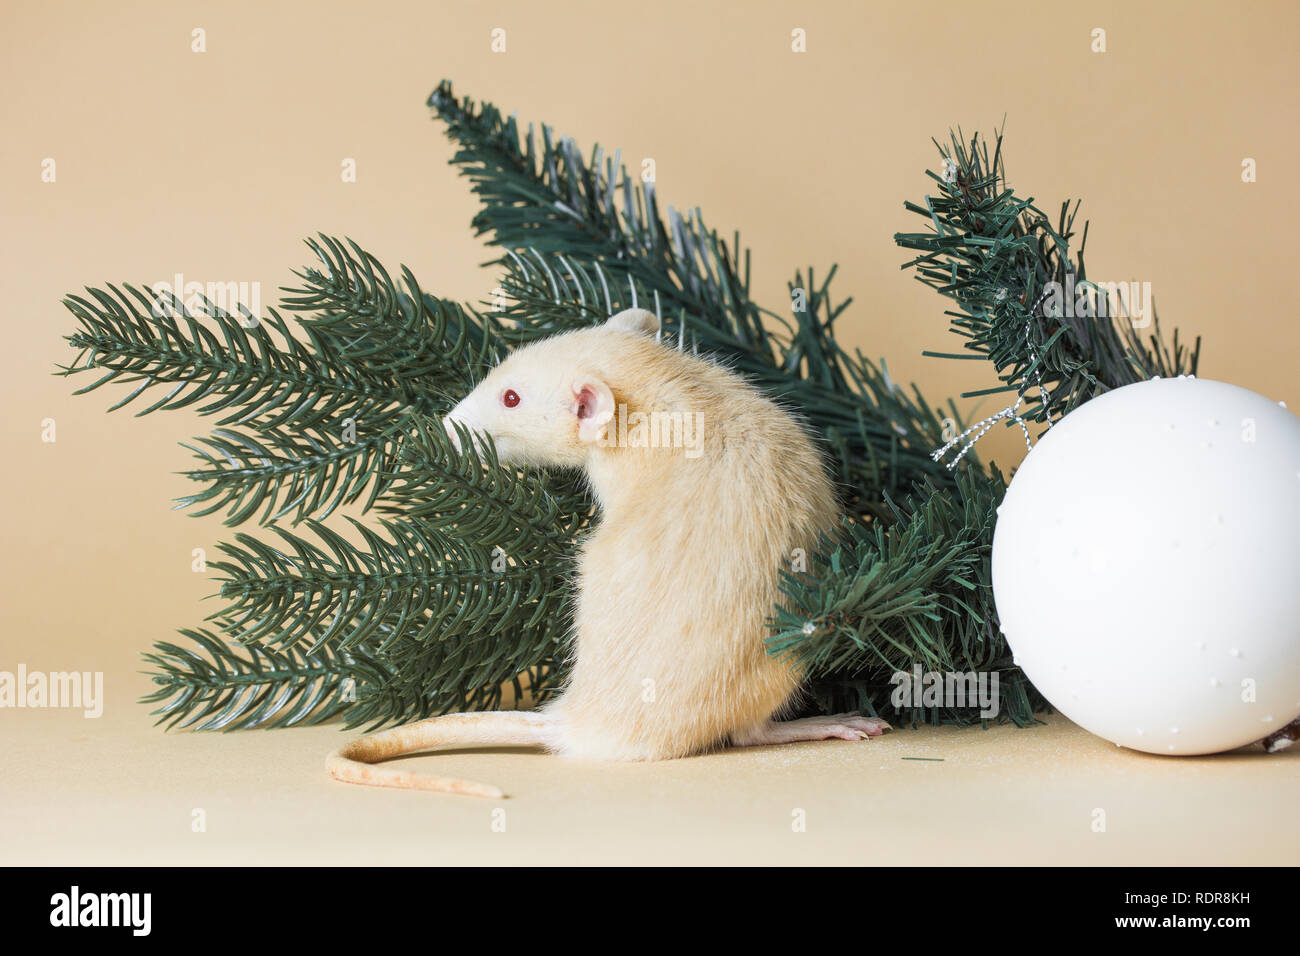 The rat is a symbol Of the new year 2020. Decorative Rat breed Husky sits on the branches of an artificial Christmas tree Stock Photo